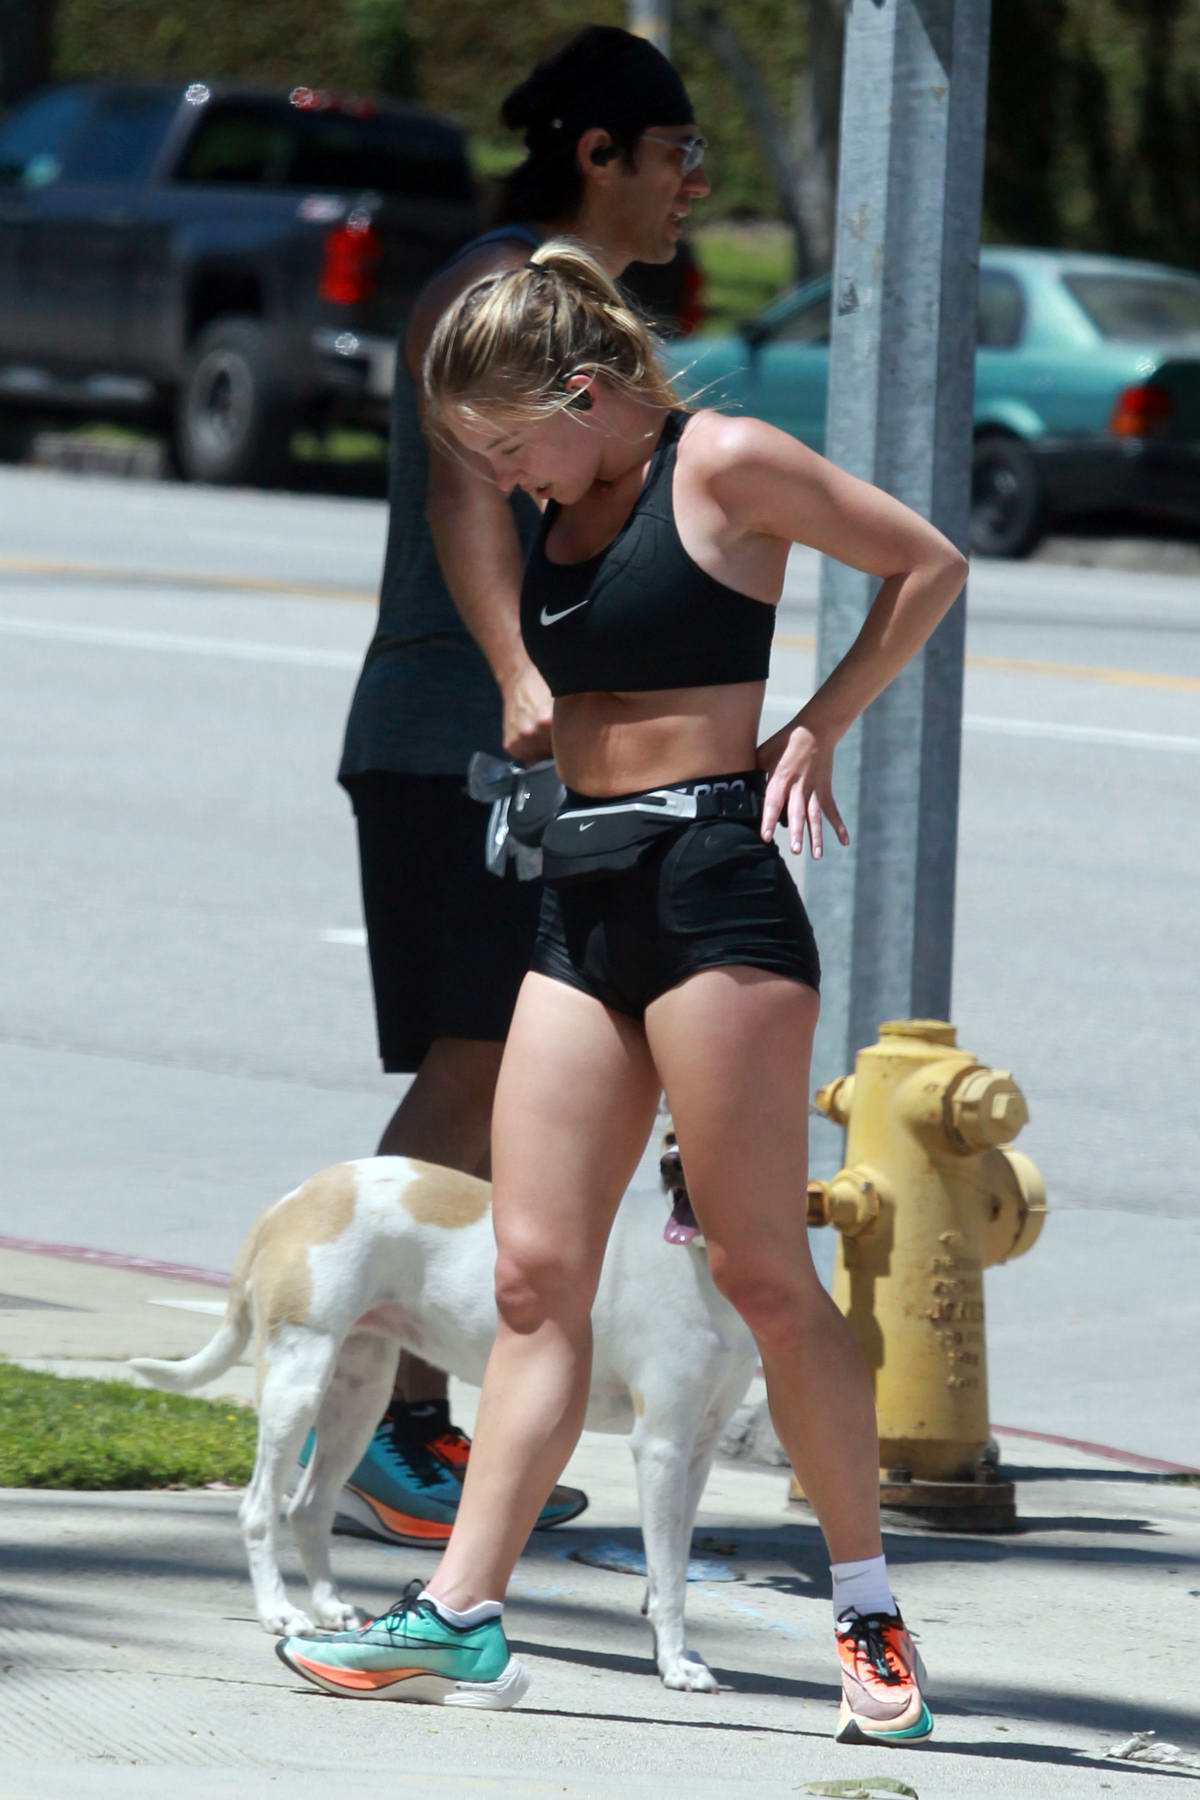 sydney-sweeney-shows-off-her-fabulous-figure-while-out-for-a-run-with-a-mystery-man-in-los-angeles-160420_23.jpg